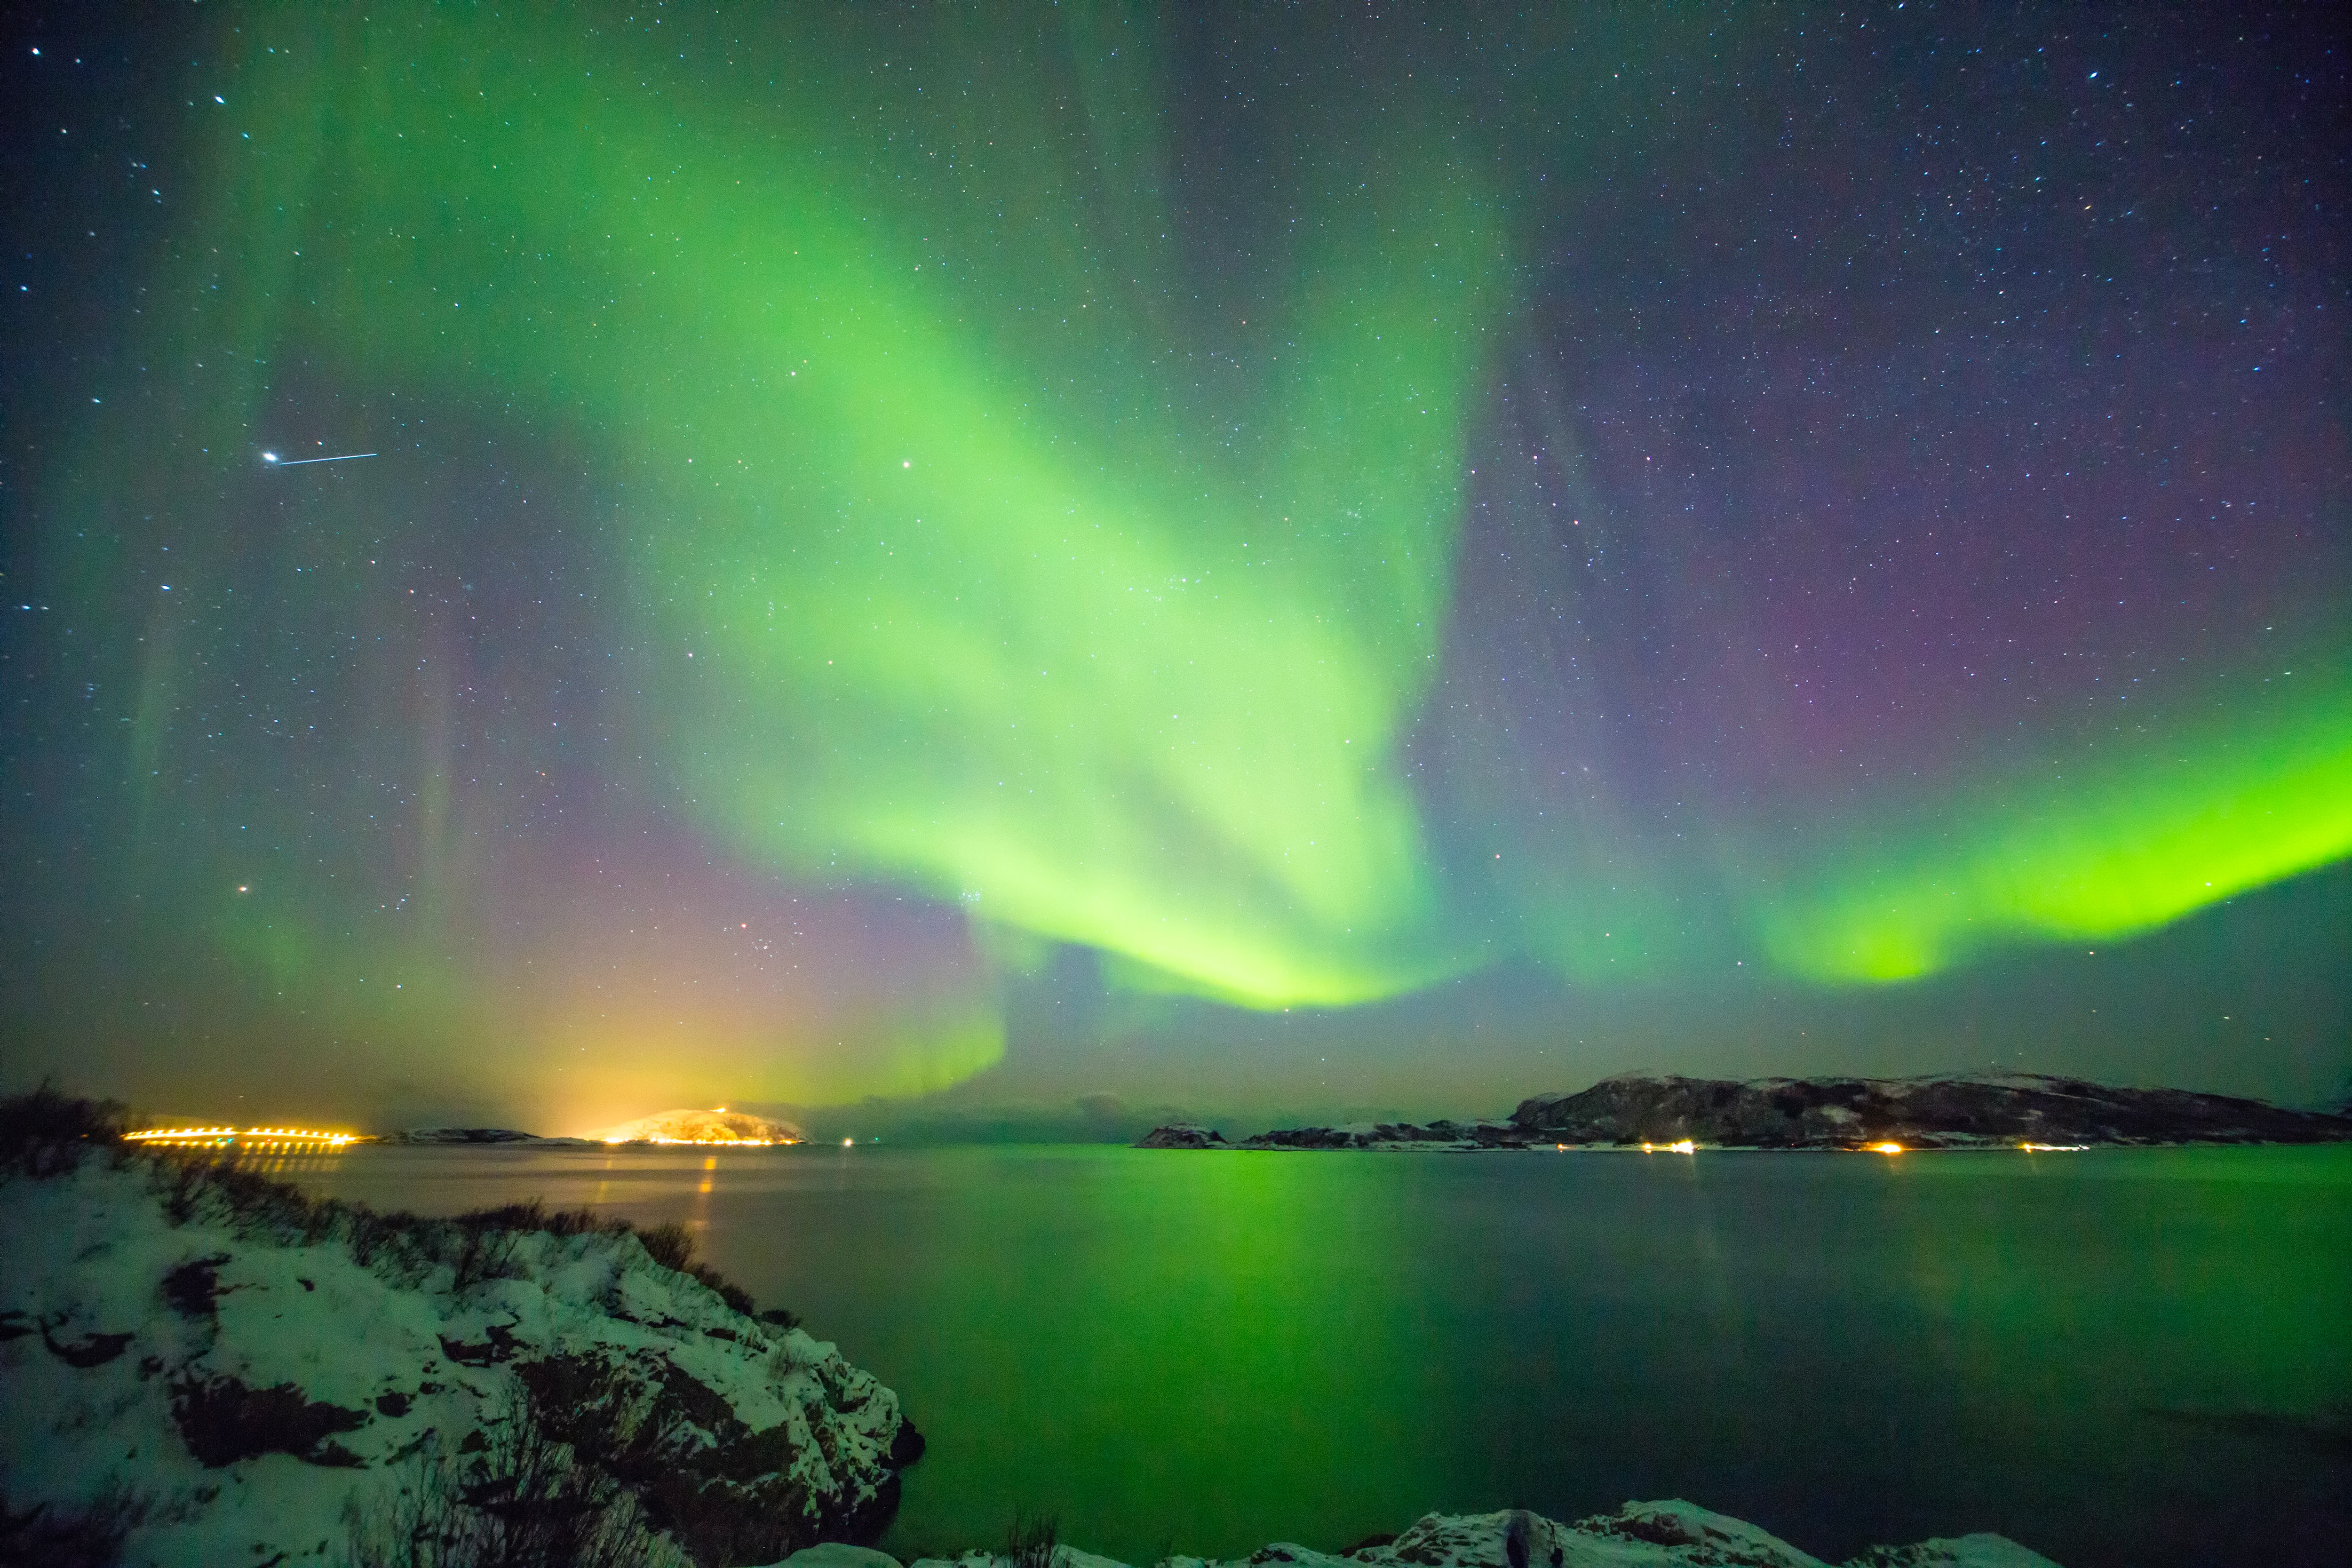 Light green aurora borealis that also has hints of blue and purple over a lake surrounded by snowy mountains.